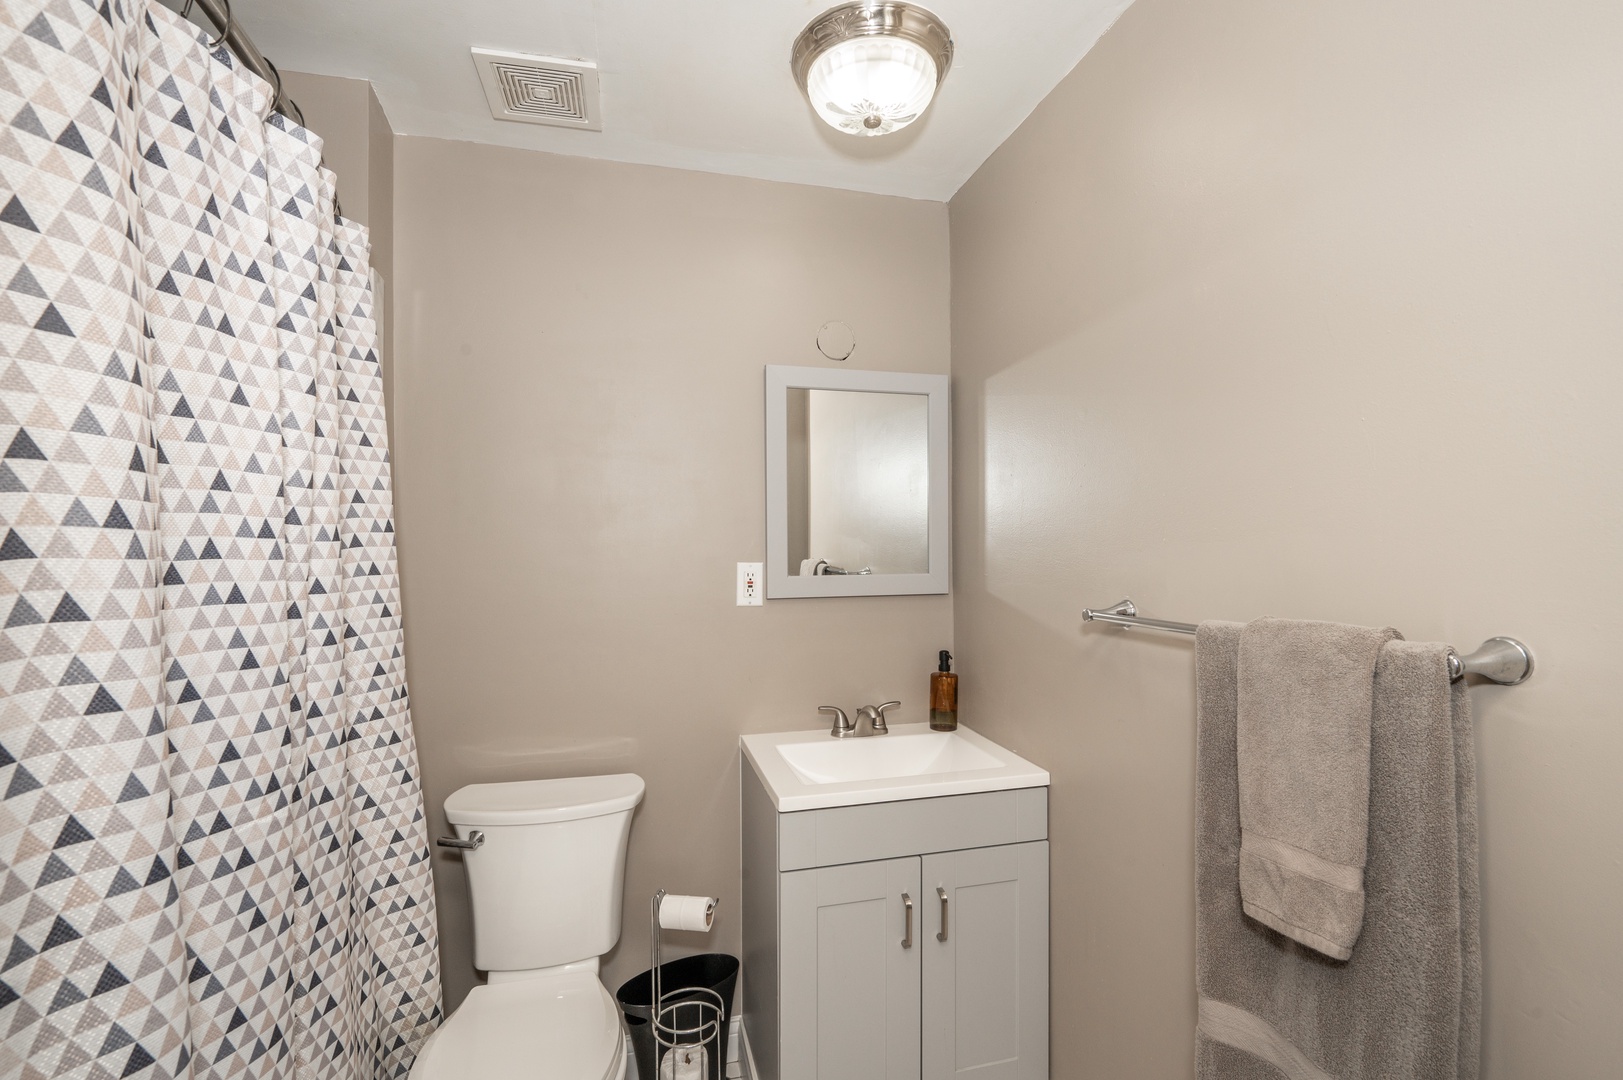 This condo’s full bathroom offers a single vanity & walk-in shower